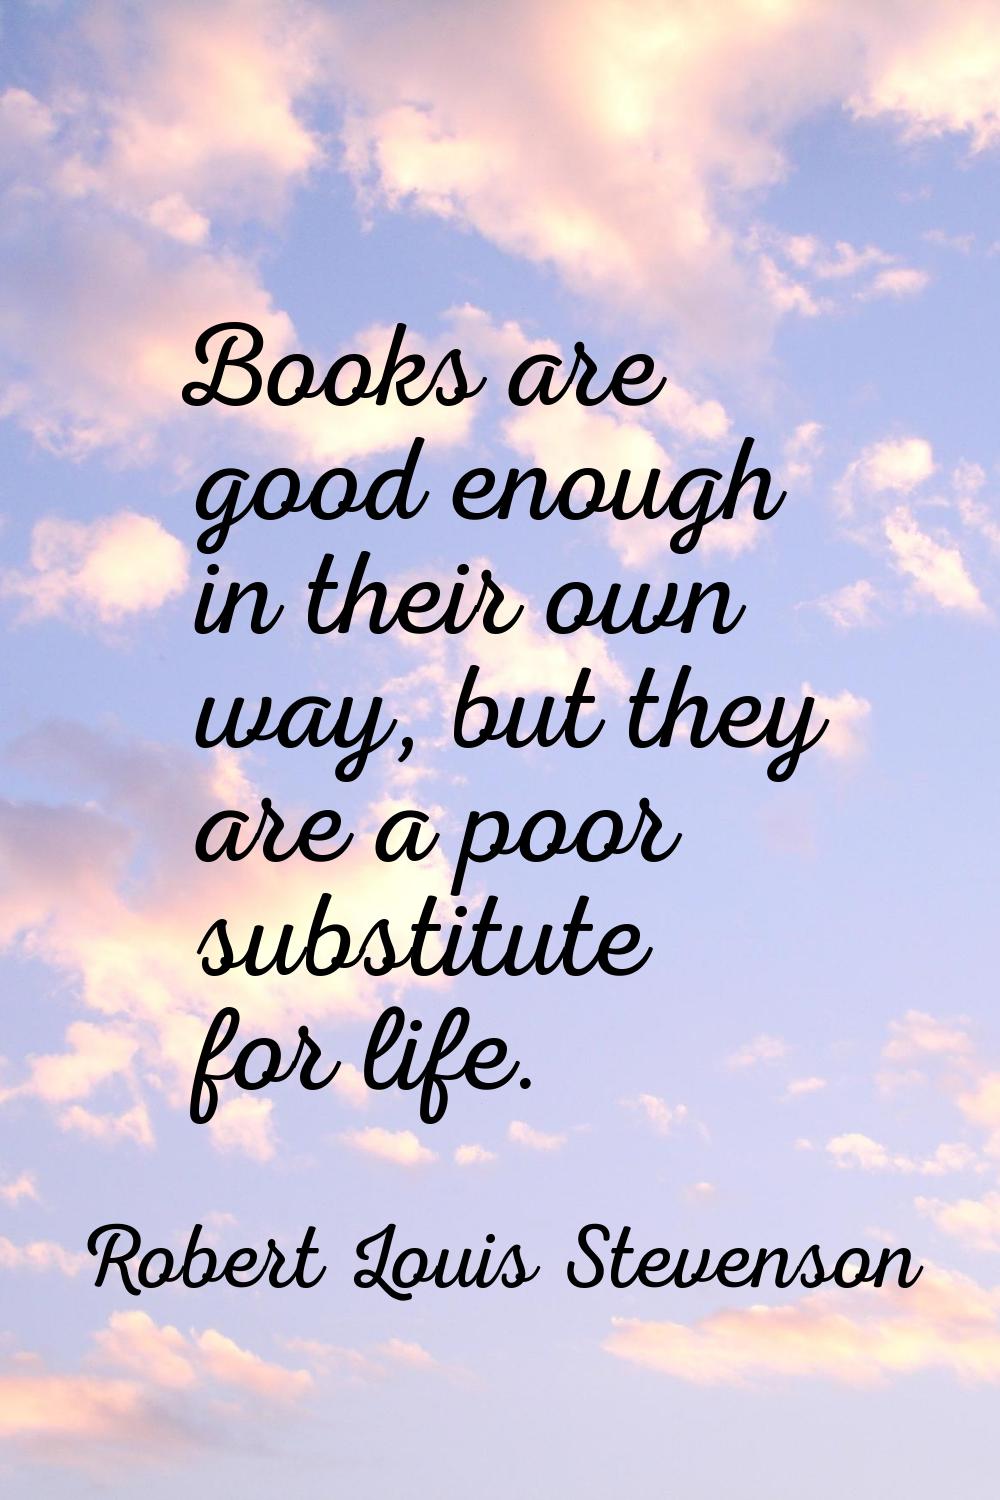 Books are good enough in their own way, but they are a poor substitute for life.